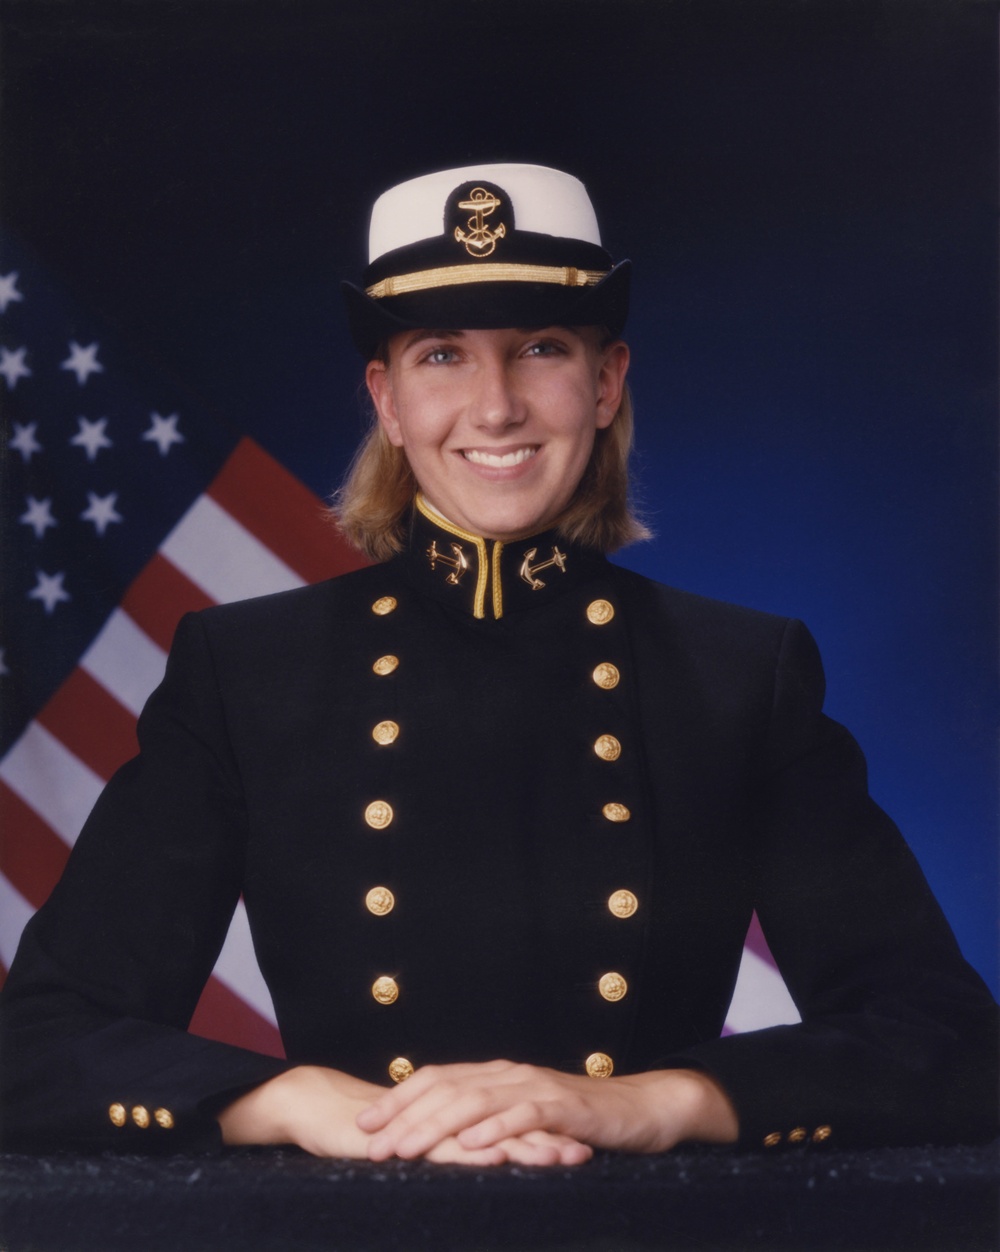 Faces of Freedom: From the Naval Academy To a New Sense of Family